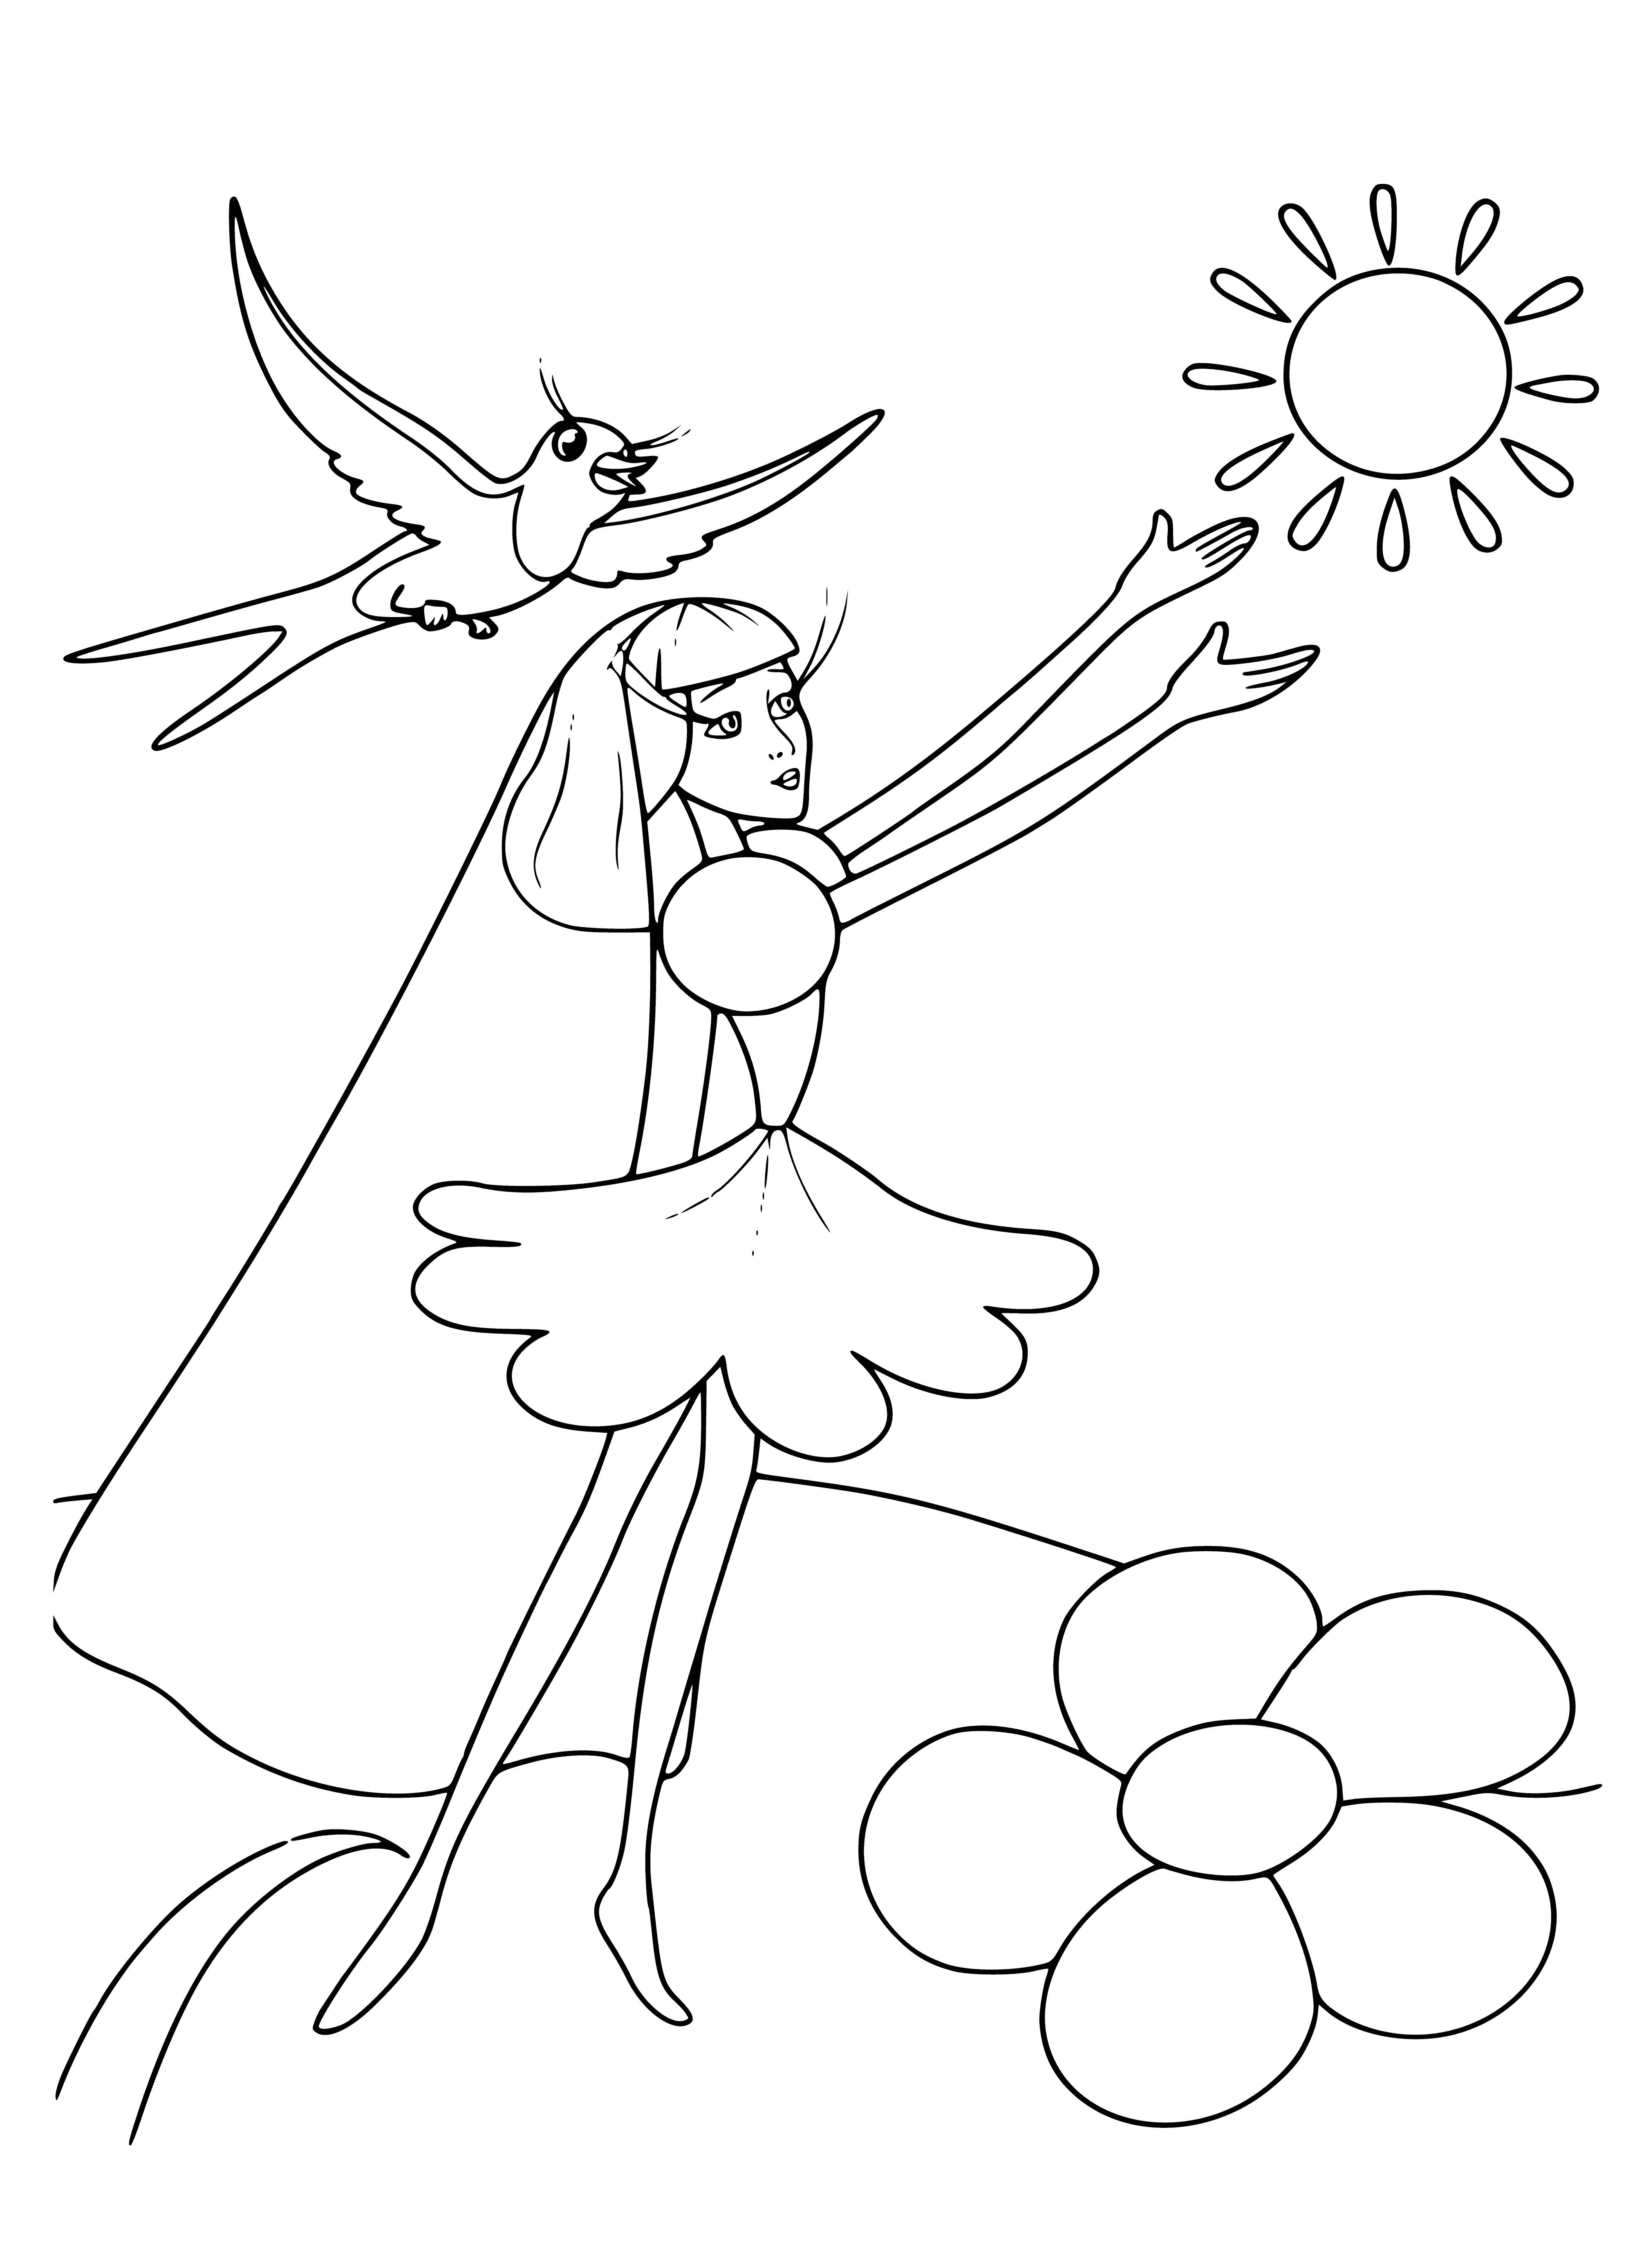 coloring page: Thumbelina says goodbye to the sun as it sets behind the mountains in a field of flowers.